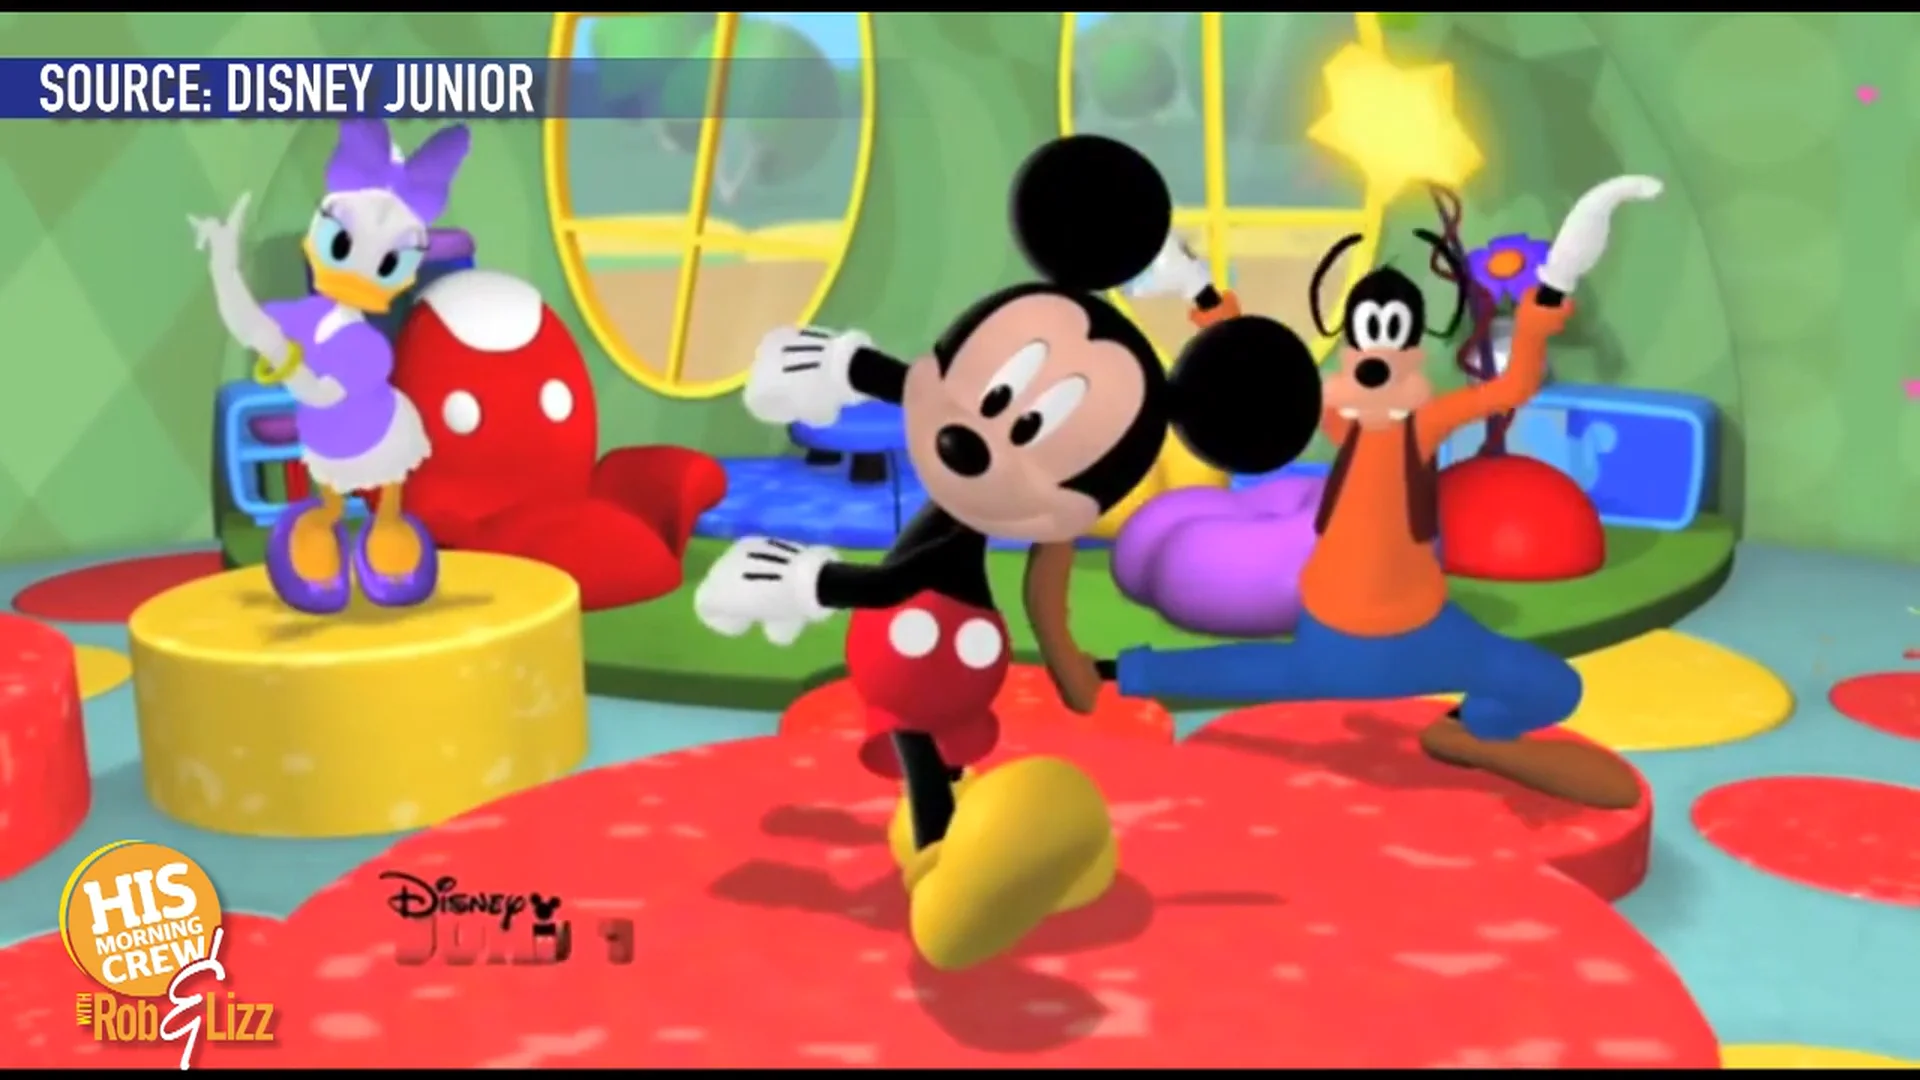 Mickey Mouse Clubhouse Launch on Vimeo